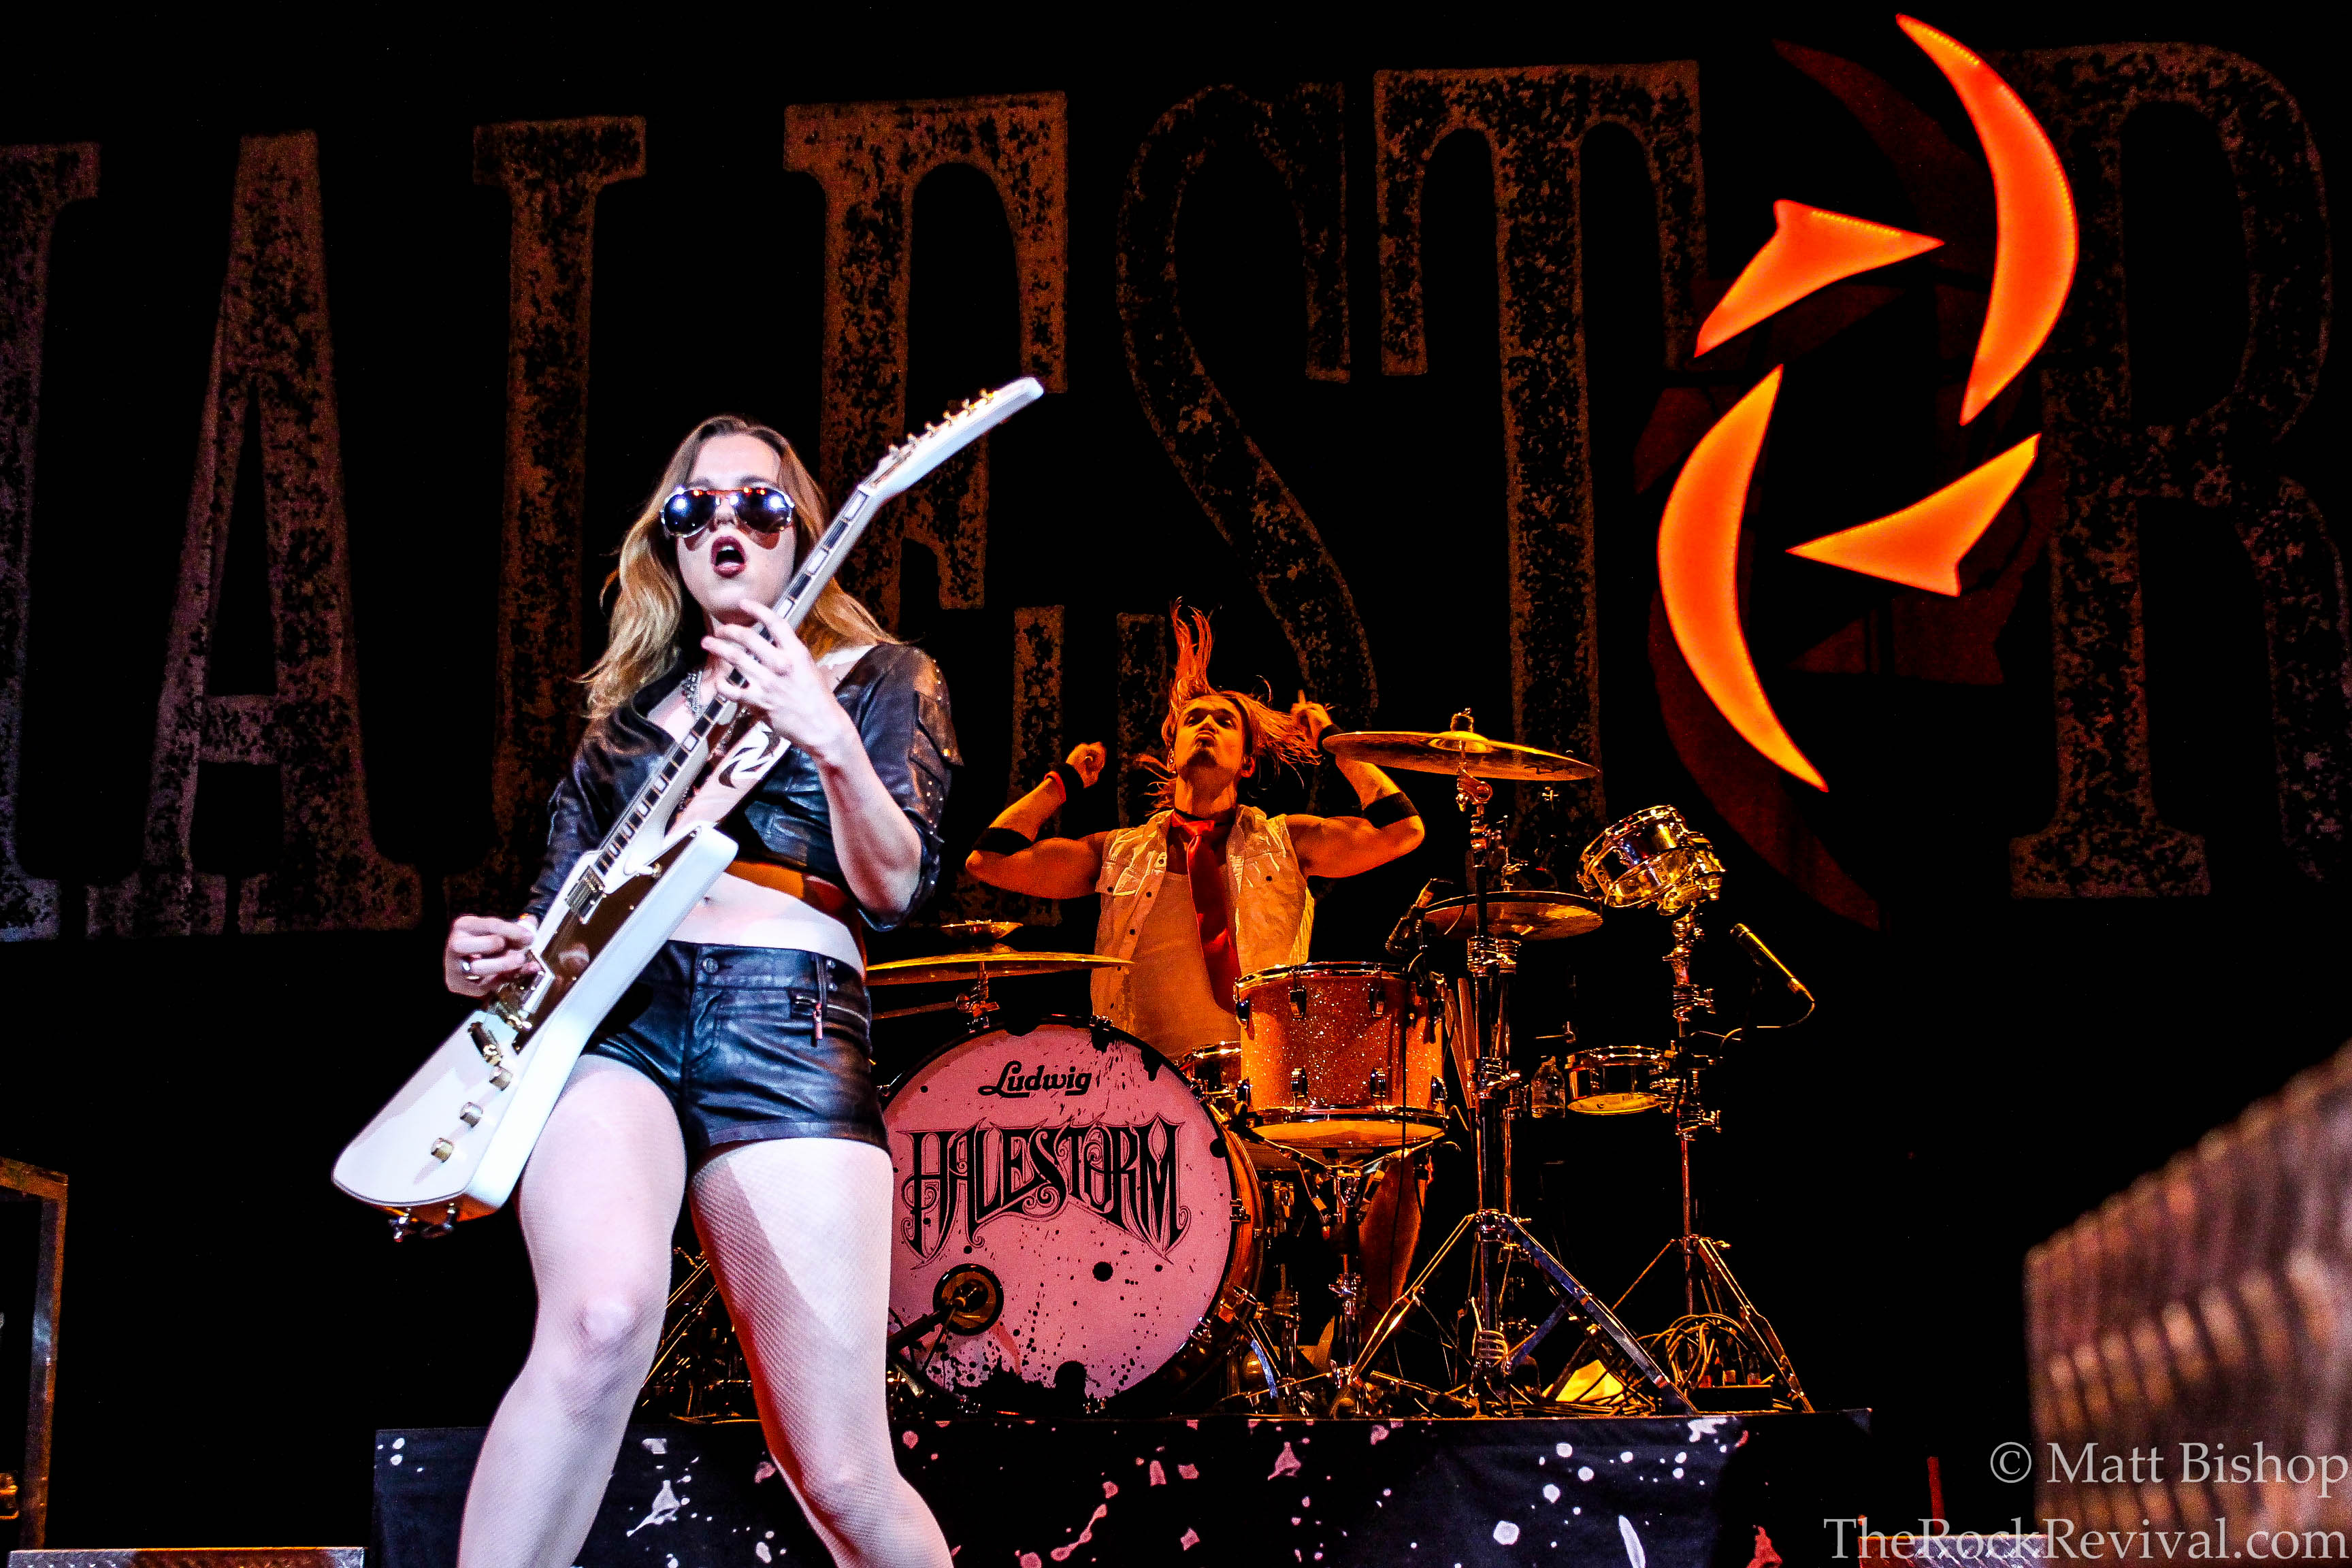 HALESTORM PREMIERE MUSIC VIDEO FOR NEW SINGLE “APOCALYPTIC”